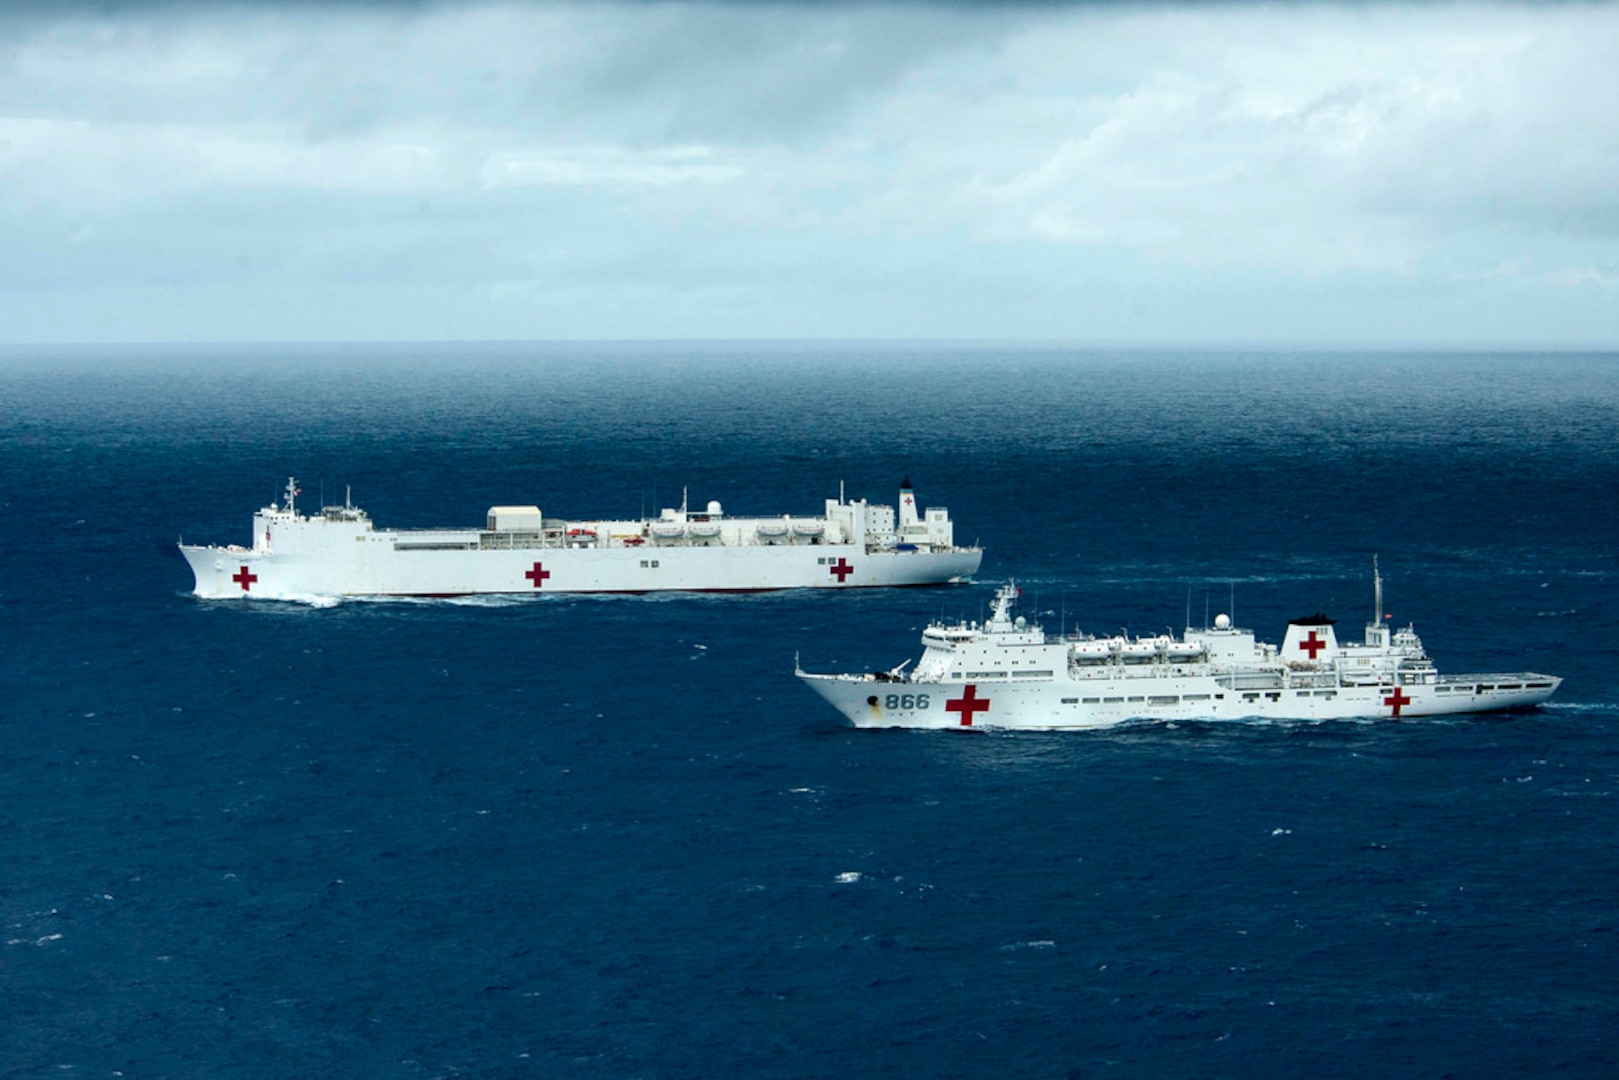 PACIFIC OCEAN (July 22, 20140) - Military Sealift Command hospital ship USNS Mercy (T-AH 19) and China's People's Liberation Army (Navy) hospital ship Peace Ark (T-AH 866) transit together during exercise Rim of the Pacific (RIMPAC) 2014. This is the first year hospital ships have participated in RIMPAC. Twenty-two nations, 49 ships and six submarines, more than 200 aircraft and 25,000 personnel are participating in RIMPAC exercise from June 26 to Aug. 1 in and around the Hawaiian Islands and Southern California. The world's largest international maritime exercise, RIMPAC provides a unique training opportunity that helps participants foster and sustain the cooperative relationships that are critical to ensuring the safety of sea lanes and security on the world's oceans. RIMPAC 2014 is the 24th exercise in the series that began in 1971. 140722-N-VY375-775

